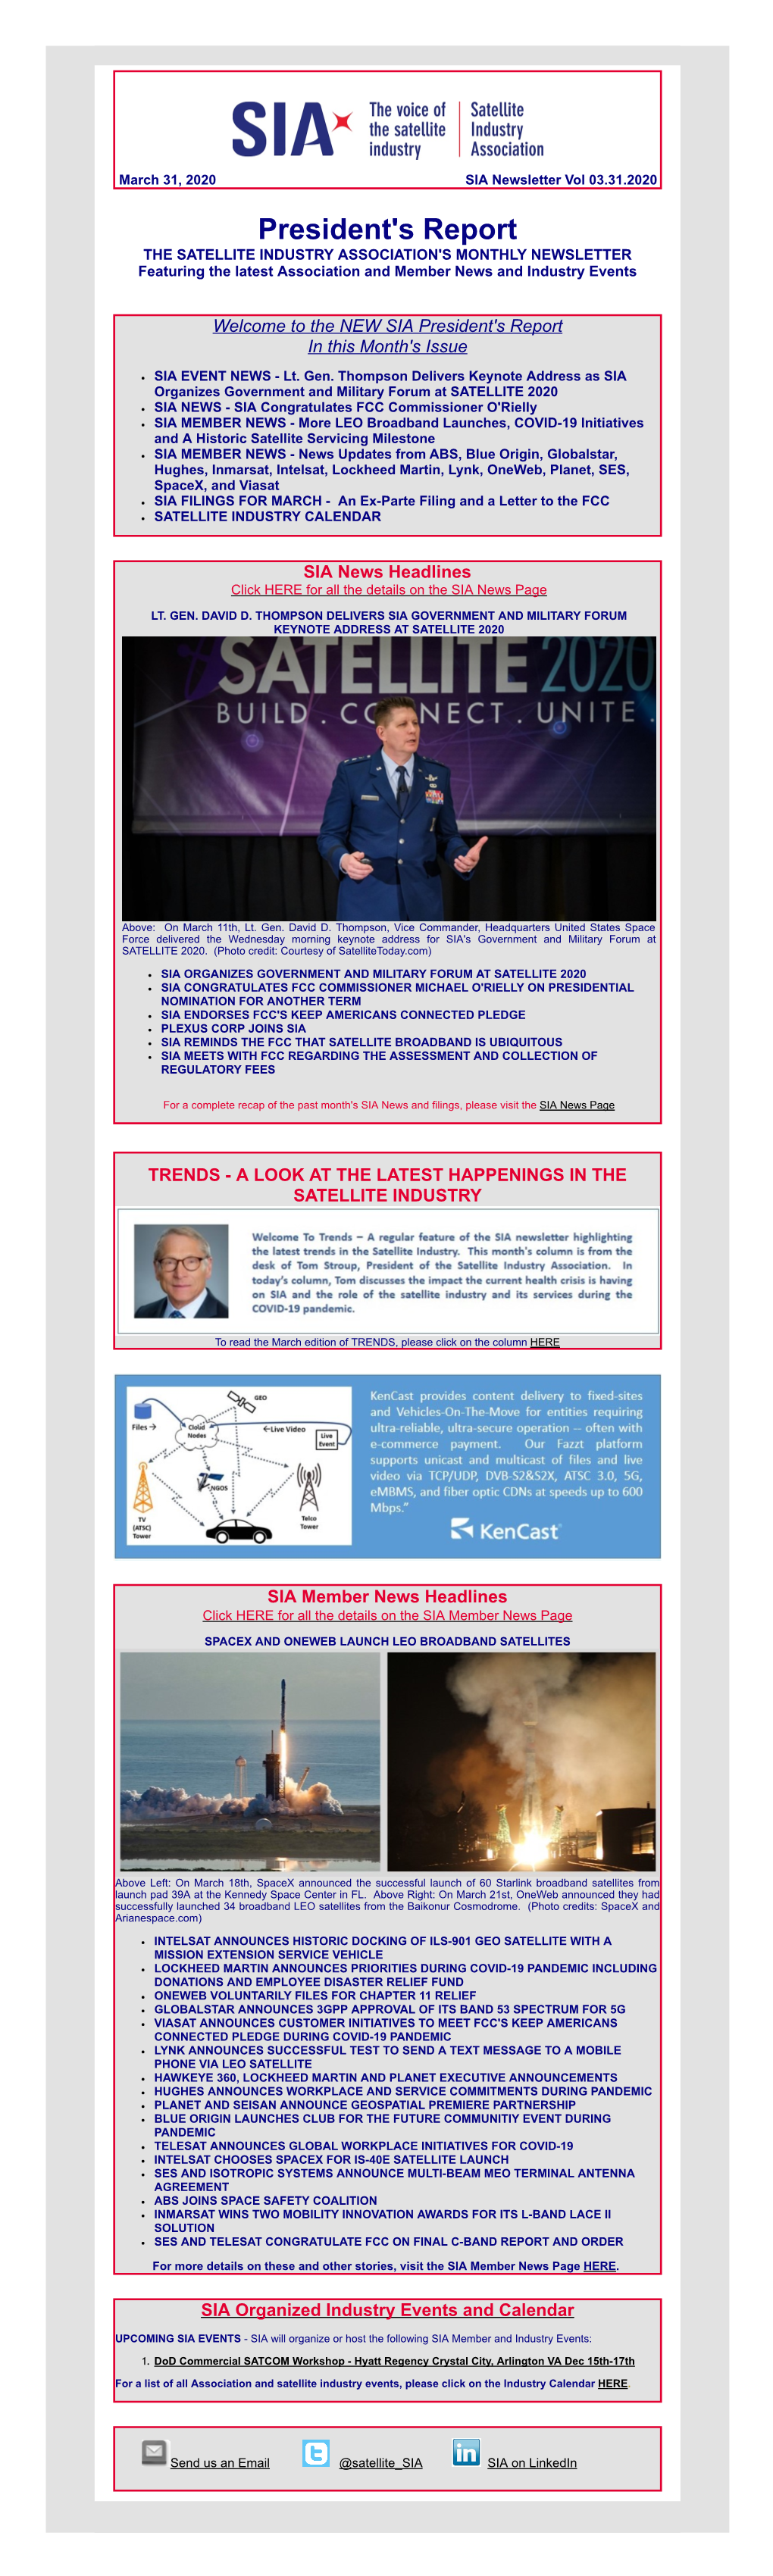 President's Report the SATELLITE INDUSTRY ASSOCIATION's MONTHLY NEWSLETTER Featuring the Latest Association and Member News and Industry Events